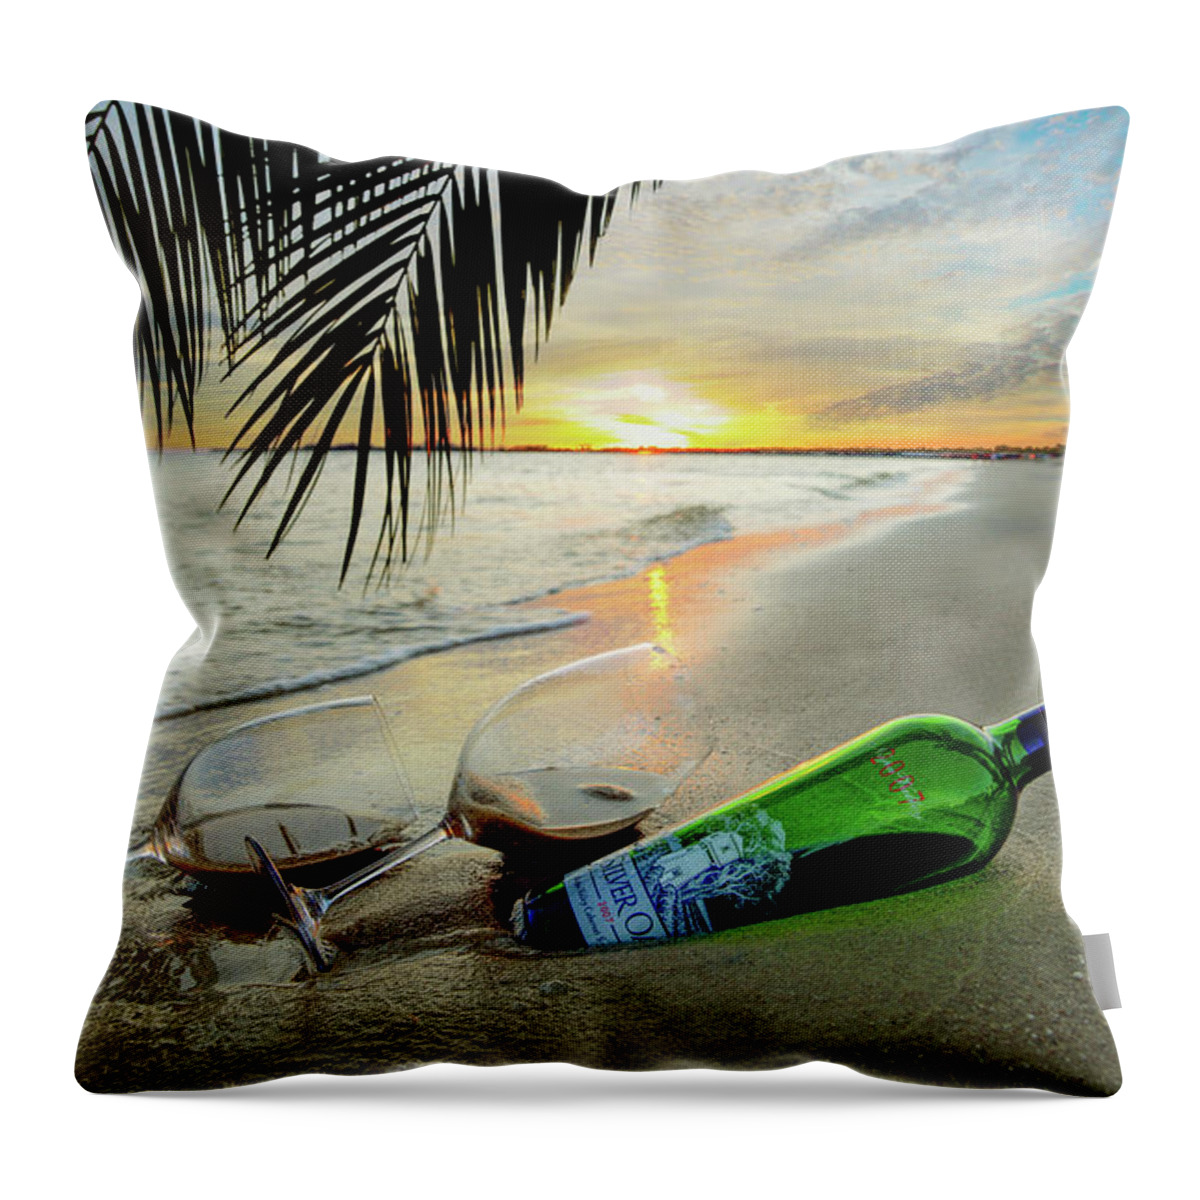 Wine Throw Pillow featuring the photograph Lost in Paradise by Jon Neidert